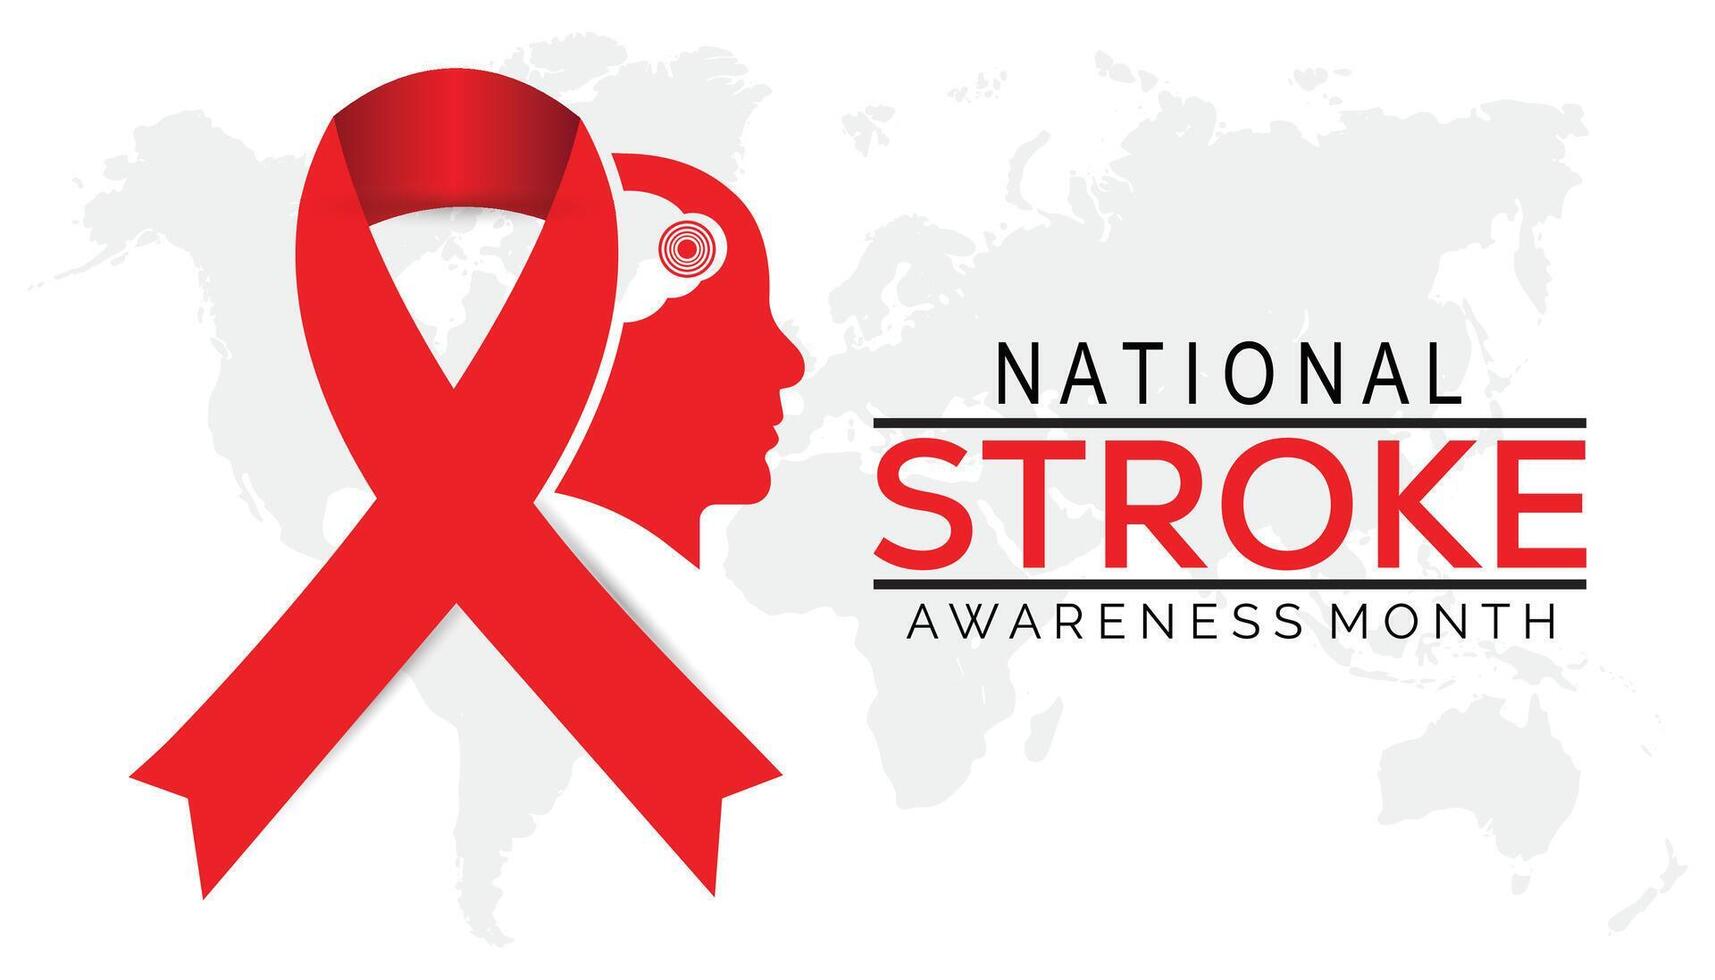 National Stroke awareness month observed every year in May. Template for background, banner, card, poster with text inscription. vector